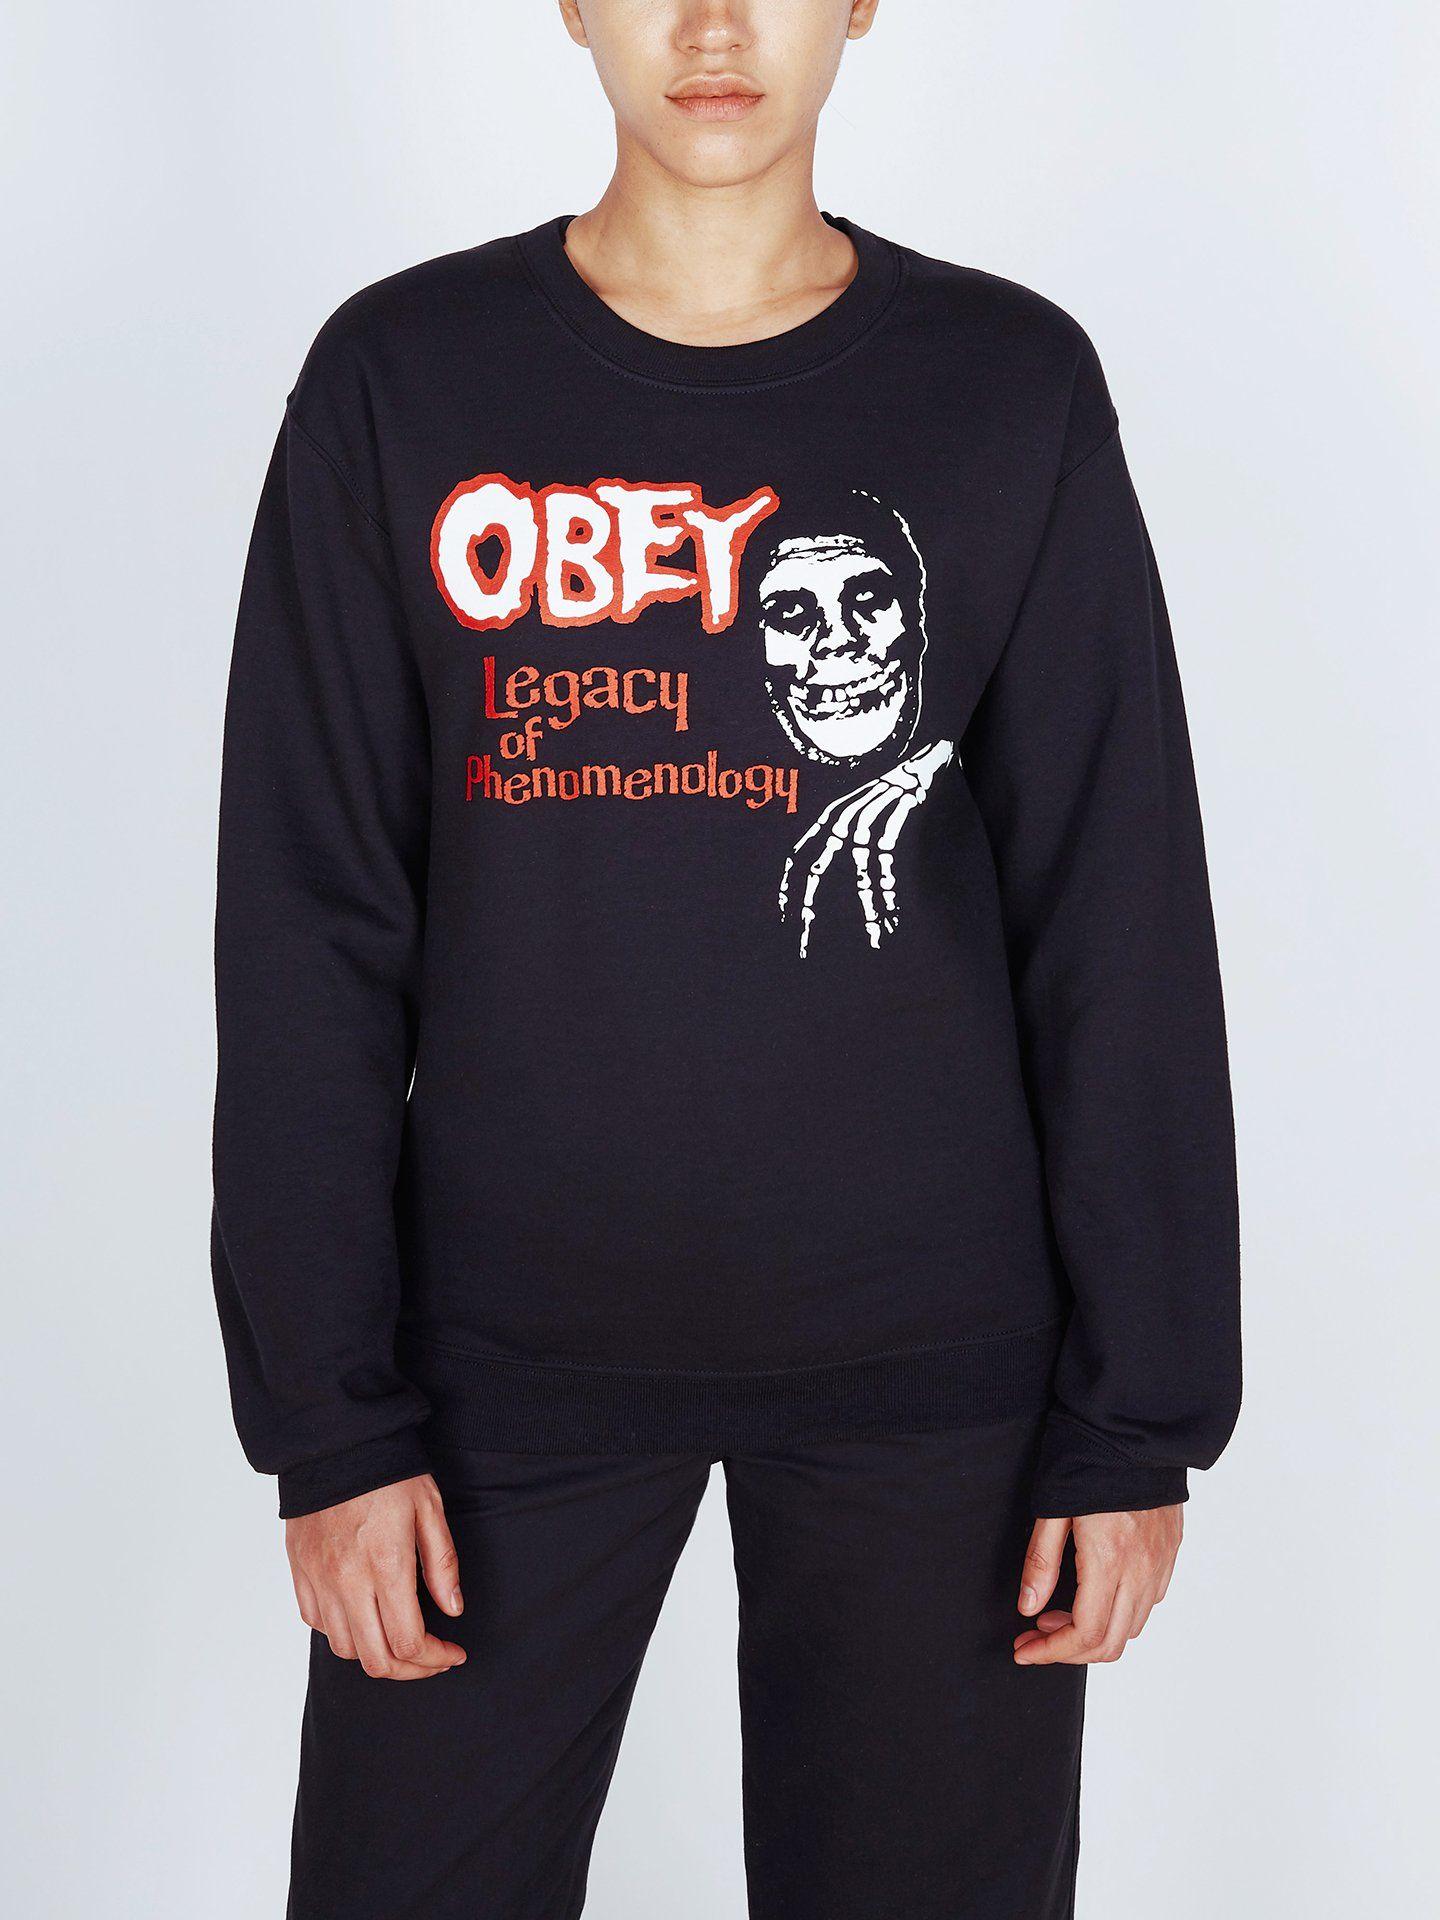 OBEY Clothing Old Logo - OBEY / Obey Misfits Legacy Of Phenomenolgy Old School Crewneck